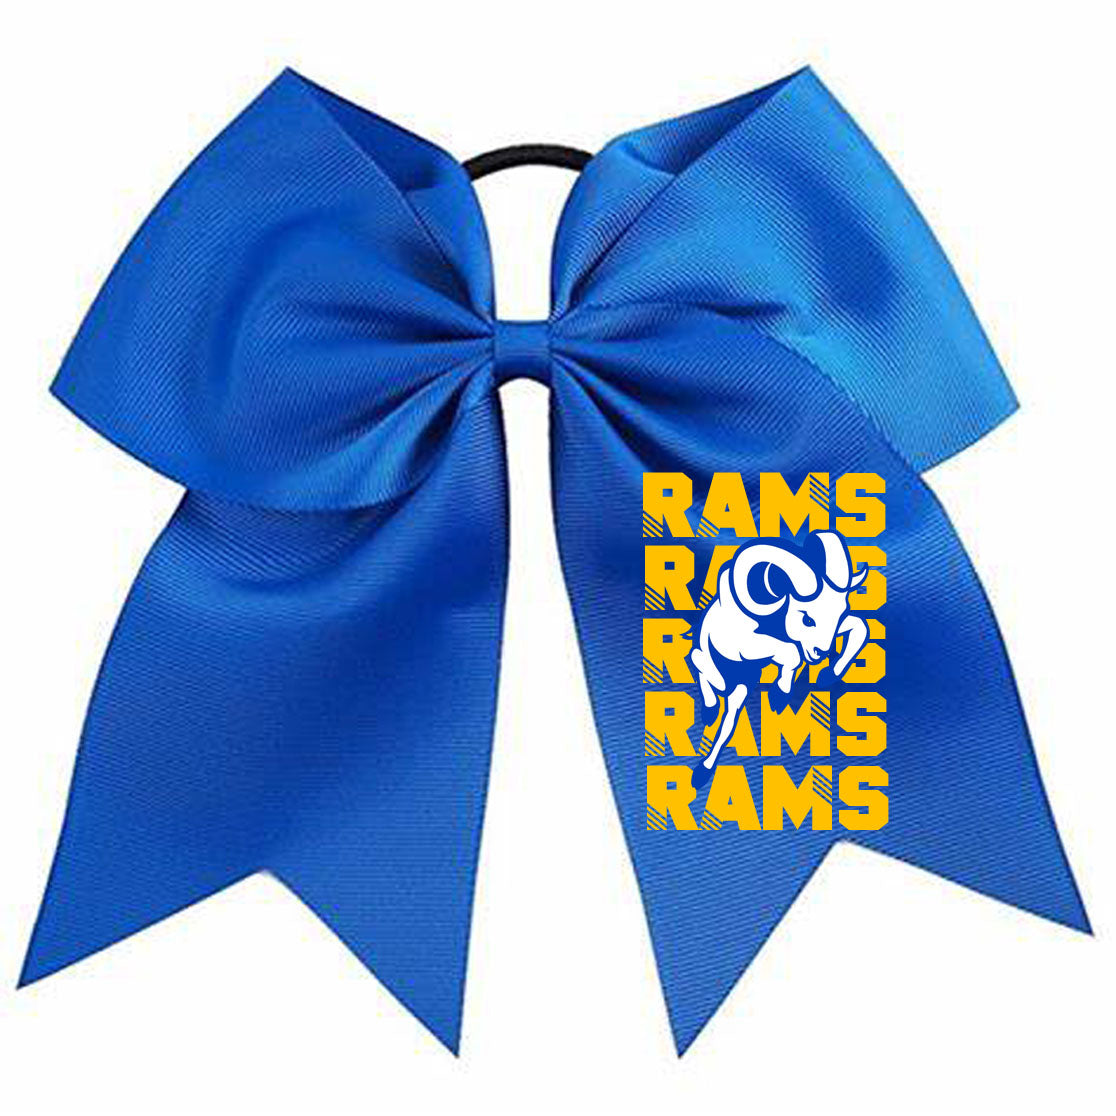 Sussex Middle School Bow Design 6